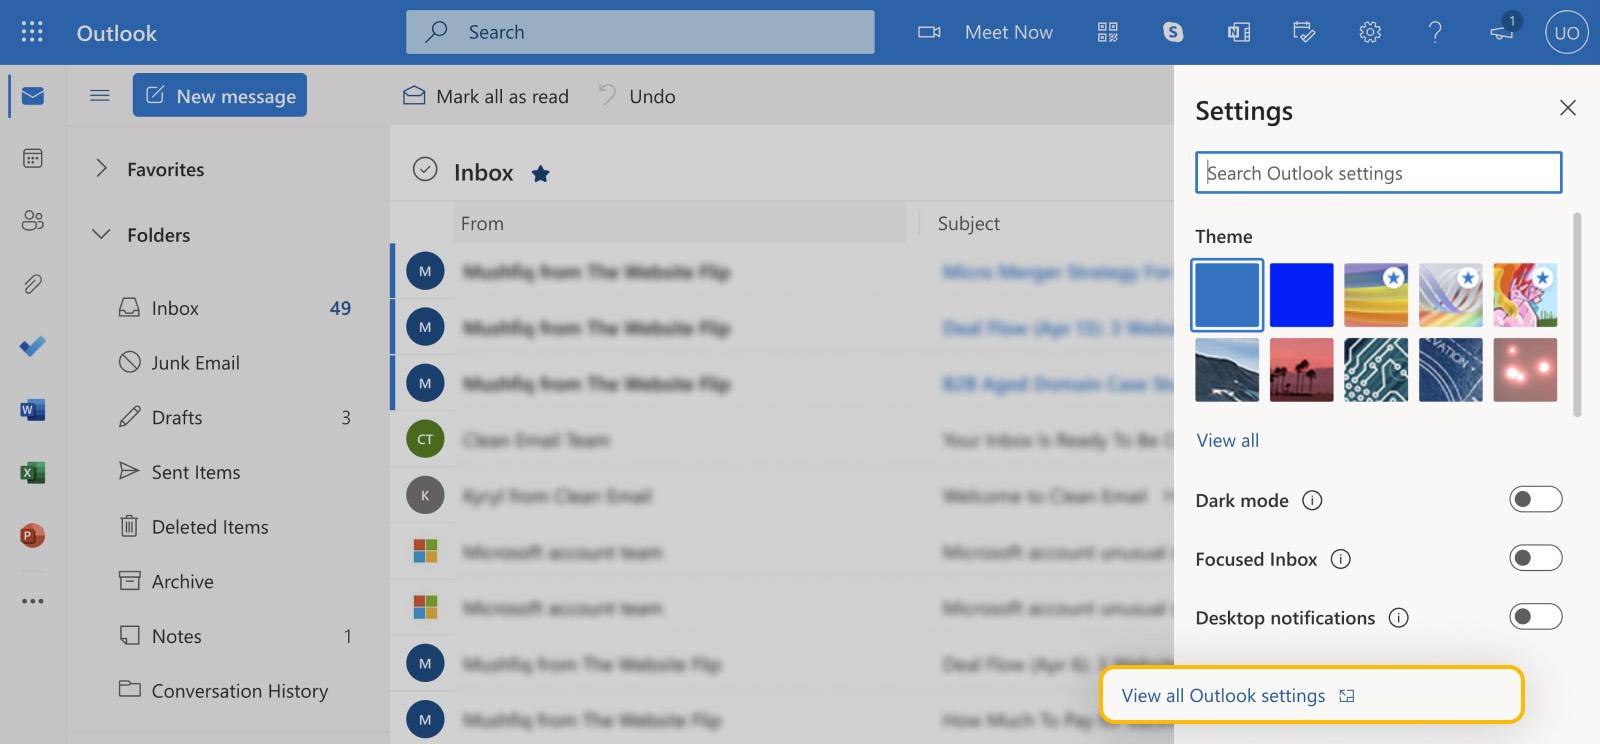 How to whitelist in Outlook